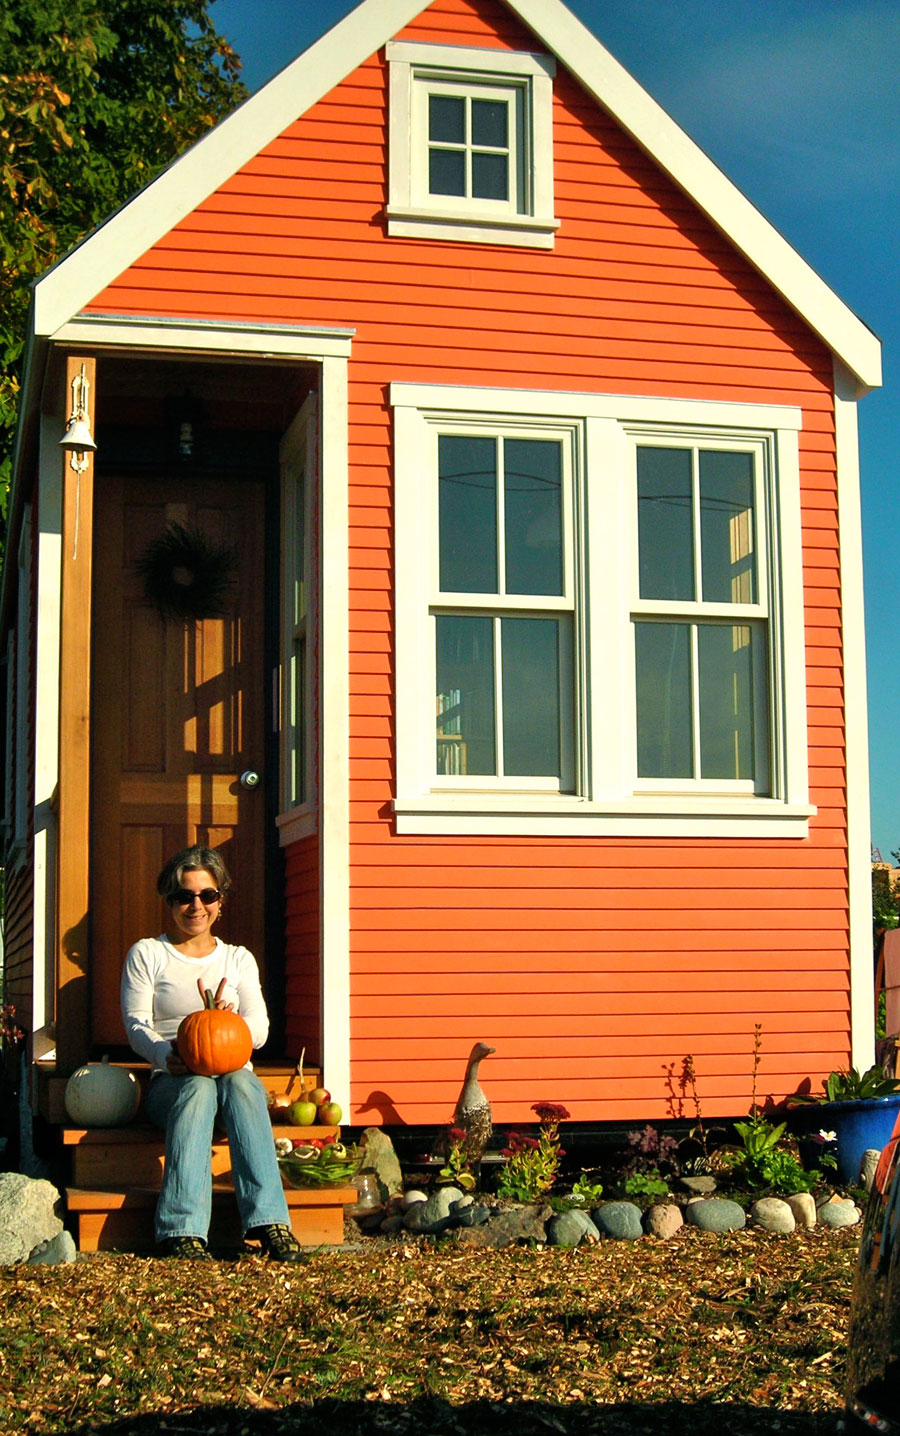 Our Tiny House - Tiny House Swoon